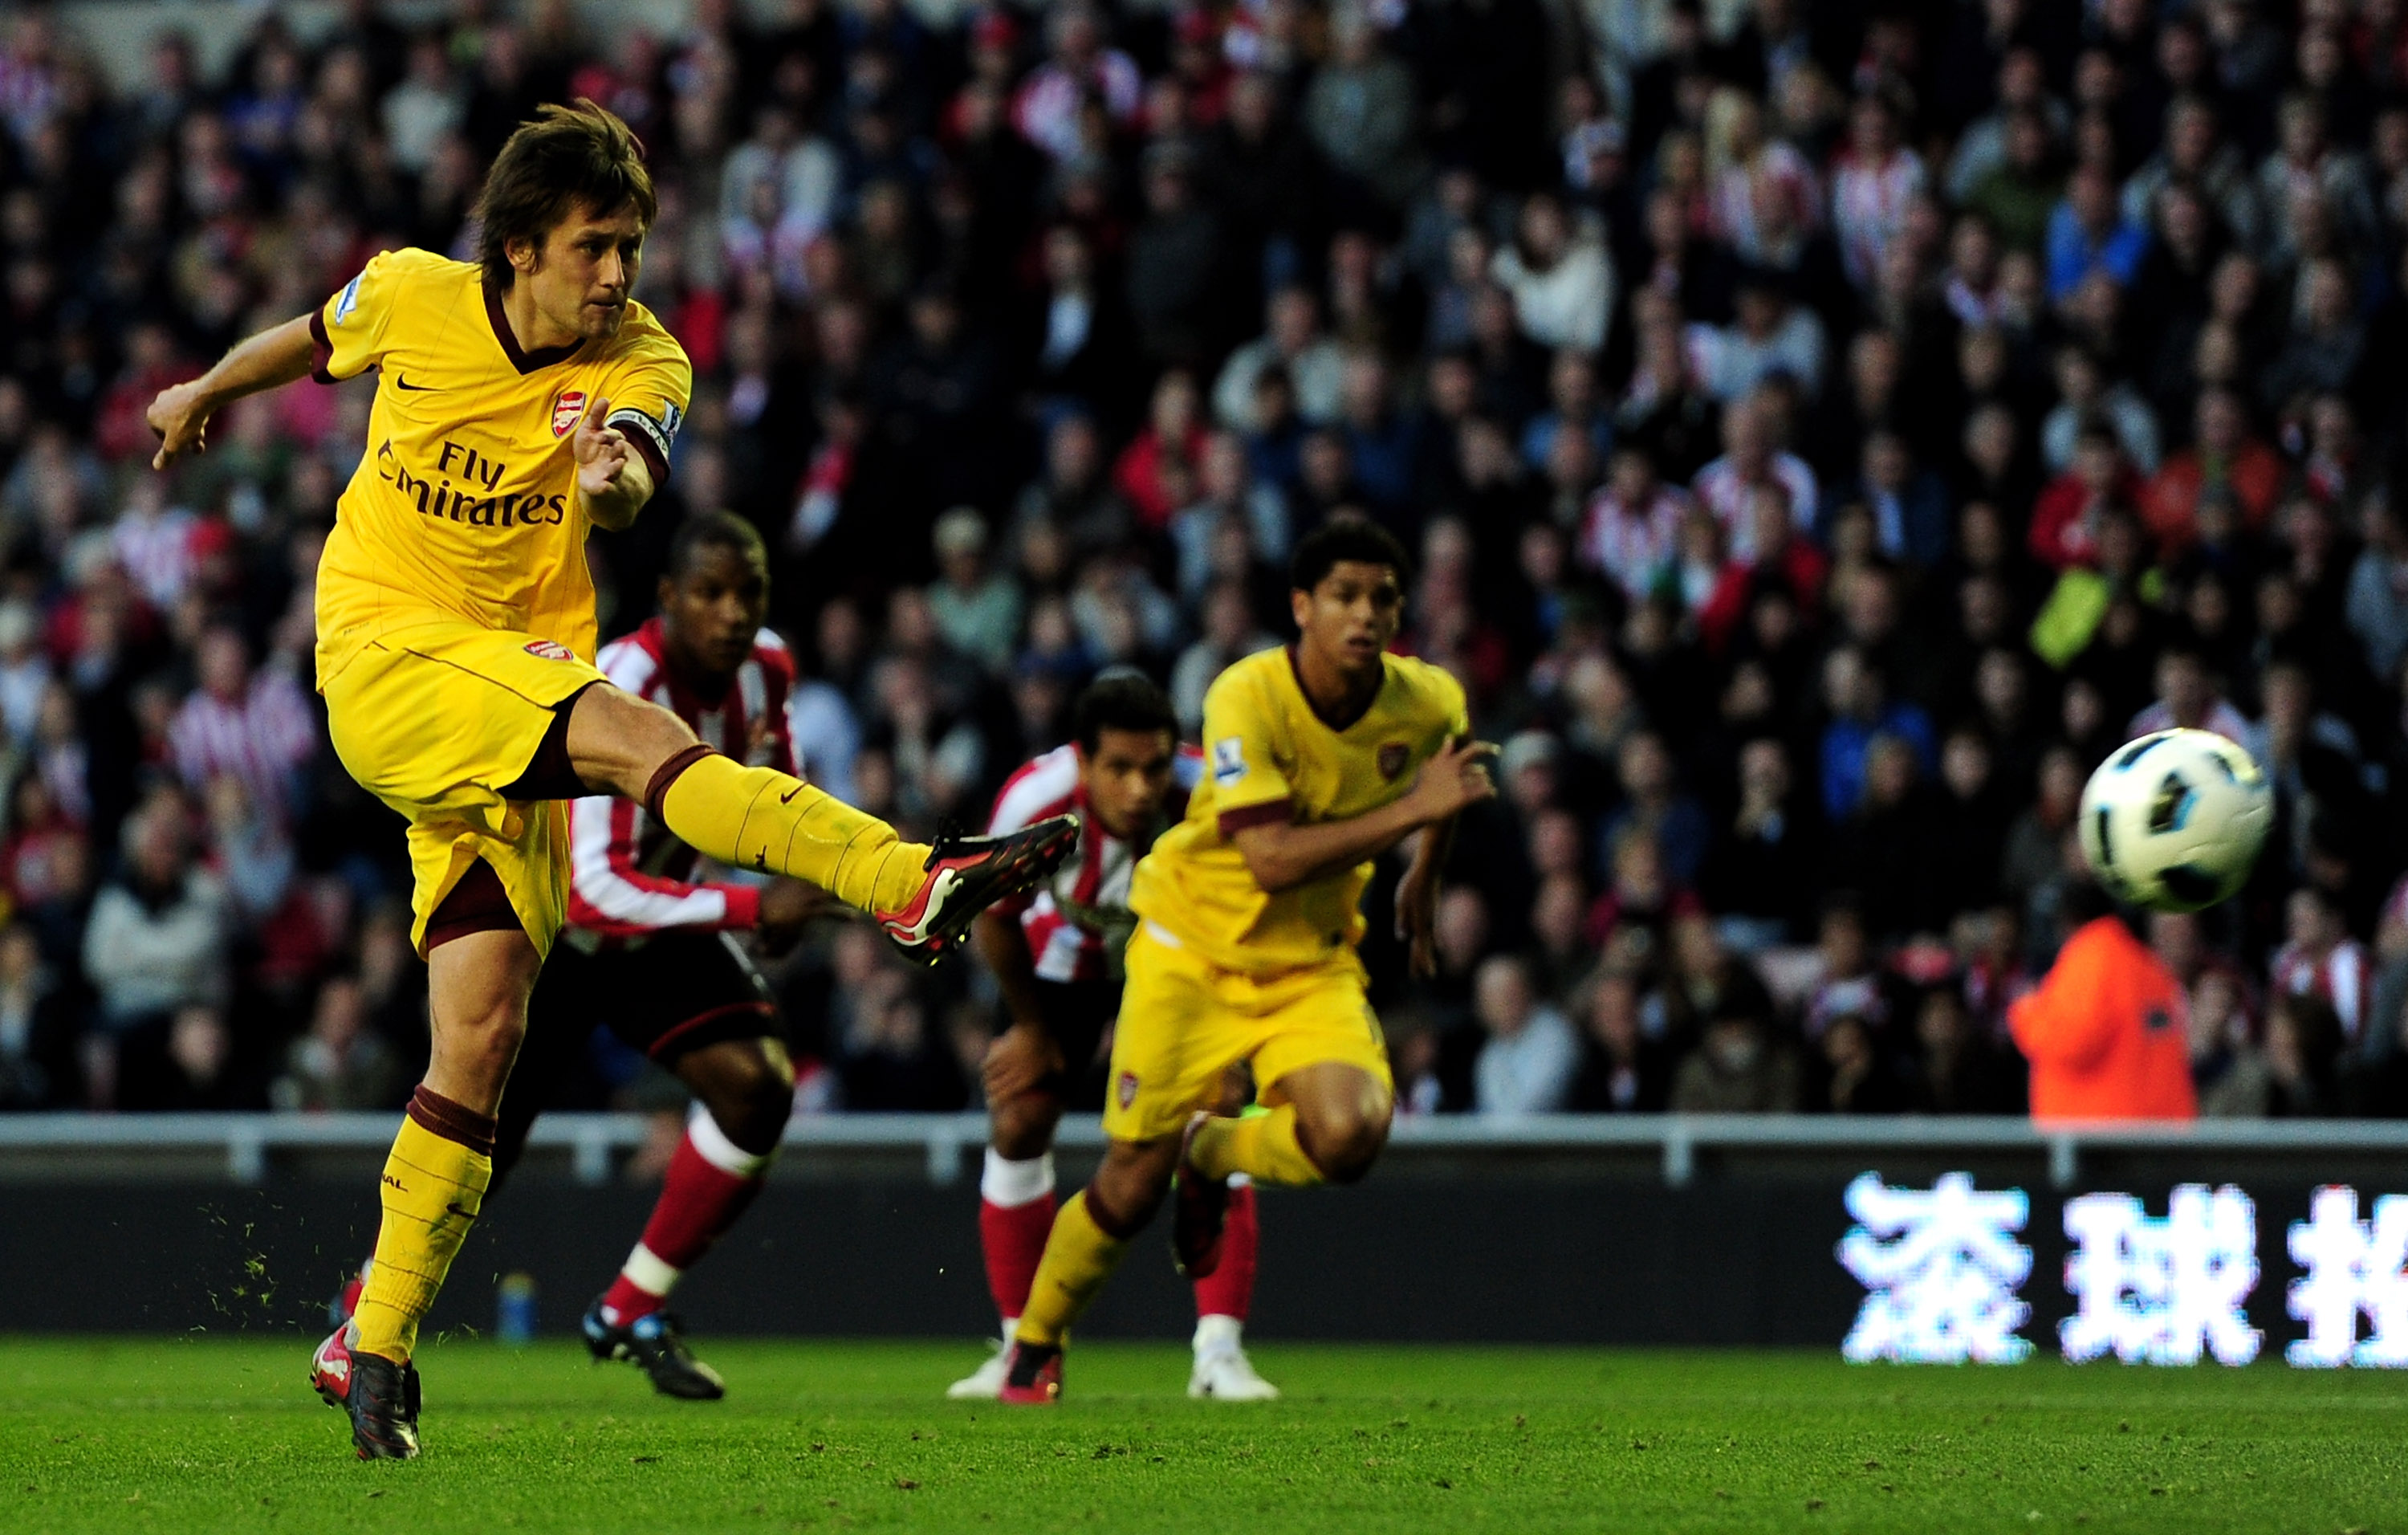 SUNDERLAND, ENGLAND - SEPTEMBER 18:  Tomas Rosicky of Arsenal misses a penalty kick during the Barclays Premier League match between Sunderland and Arsenal at the Stadium of Light on September 18, 2010 in Sunderland, England. (Photo by Jamie McDonald/Gett